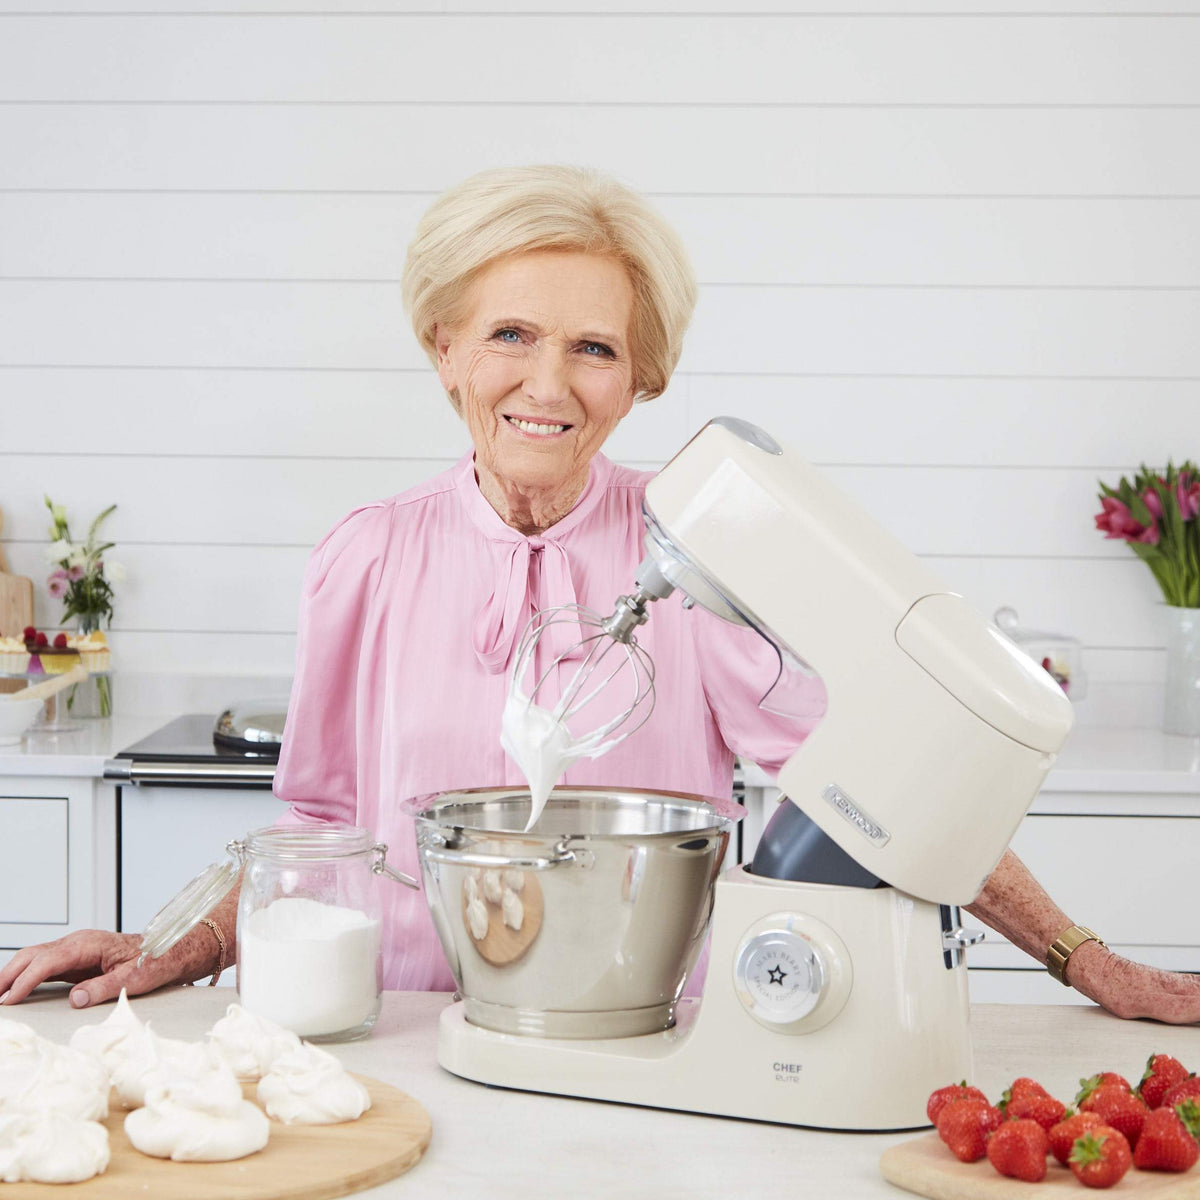 Kenwood by Mary Berry Special Edition Kenwood Chef Elite Cream